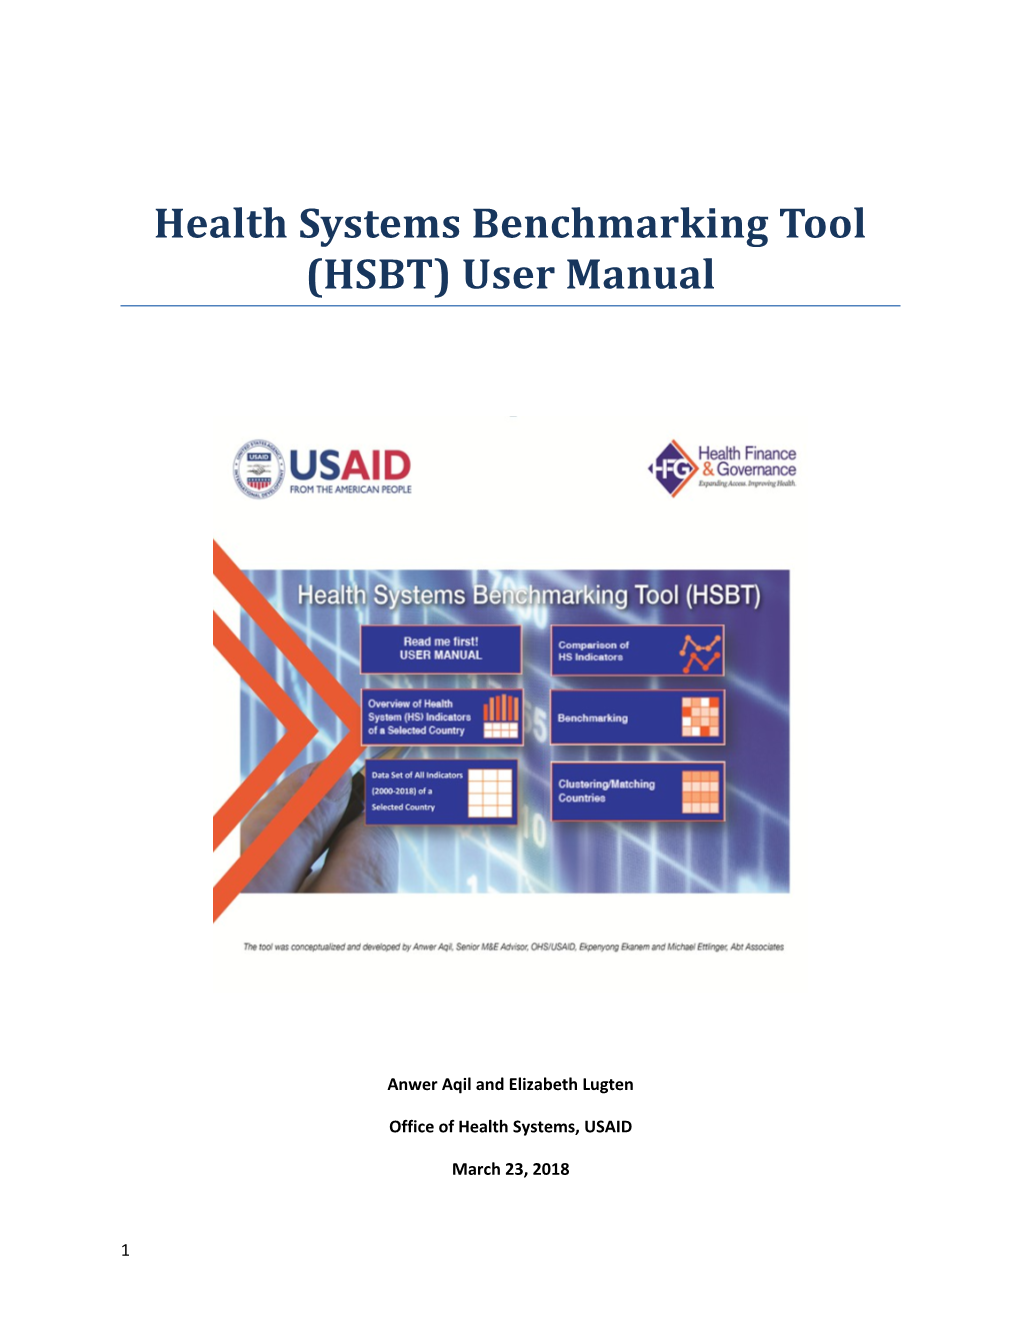 Health Systems Benchmarking Tool (HSBT) User Manual